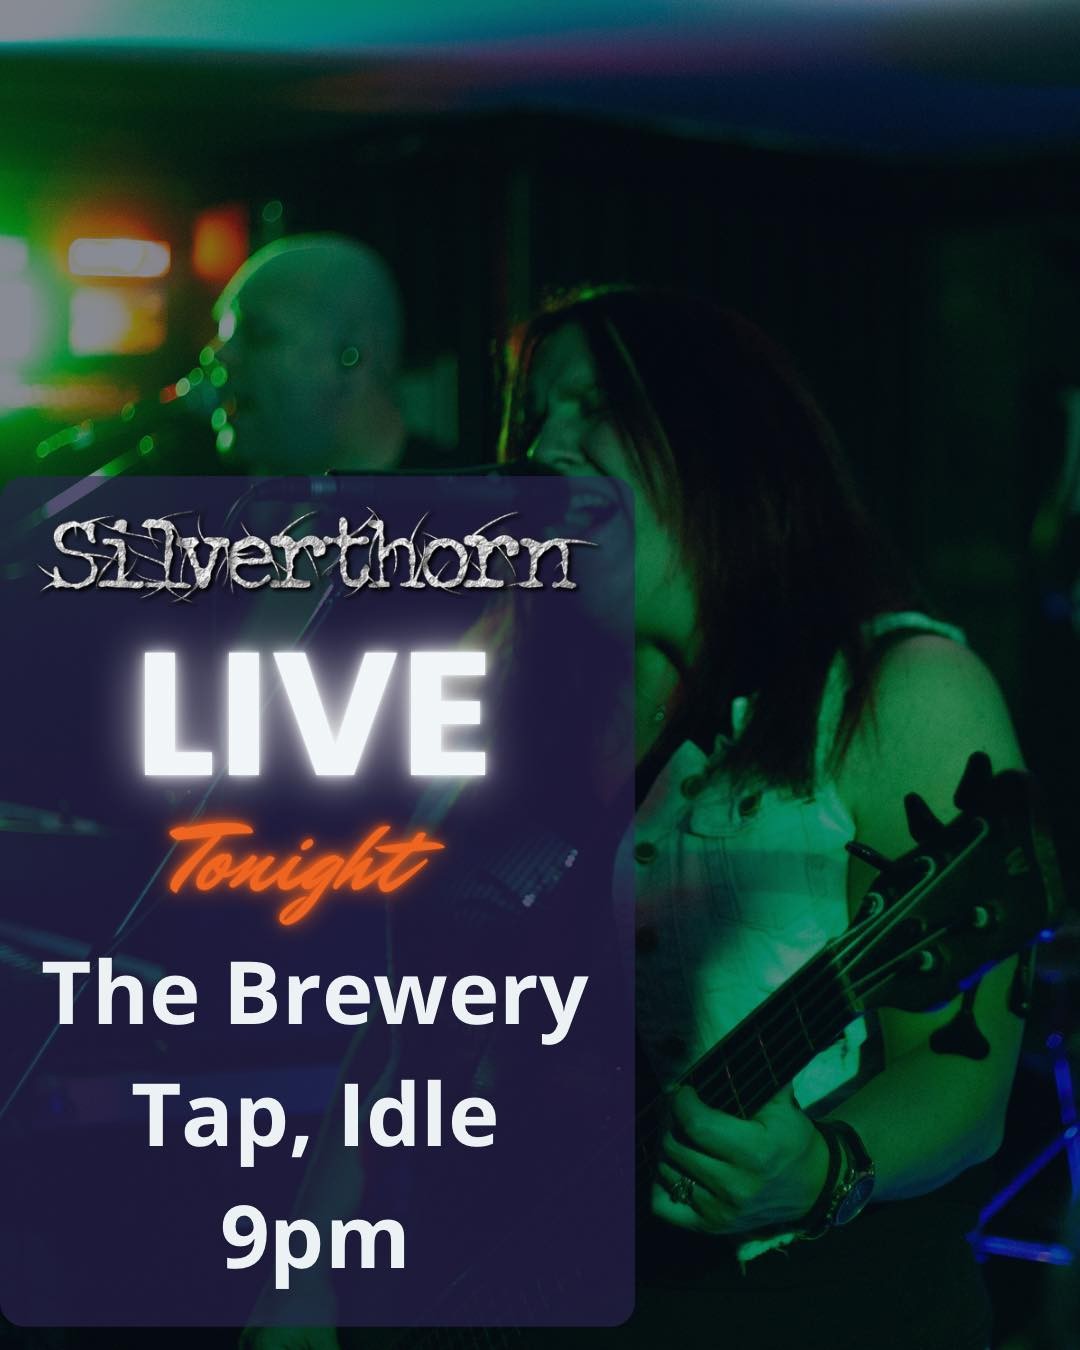 Tonight we’re bringing the ROCK to The Brewery Tap in Idle!  We love gigging here and we’re looking forward to seeing all of your familiar faces!! 

#rock #coverband #silverthorn #rocknroll #livemusic #livemusicisbetter #silverthornrock #livemusicislife #rockmusic #LiveMusicIsBack #rockandroll #stadiumrock